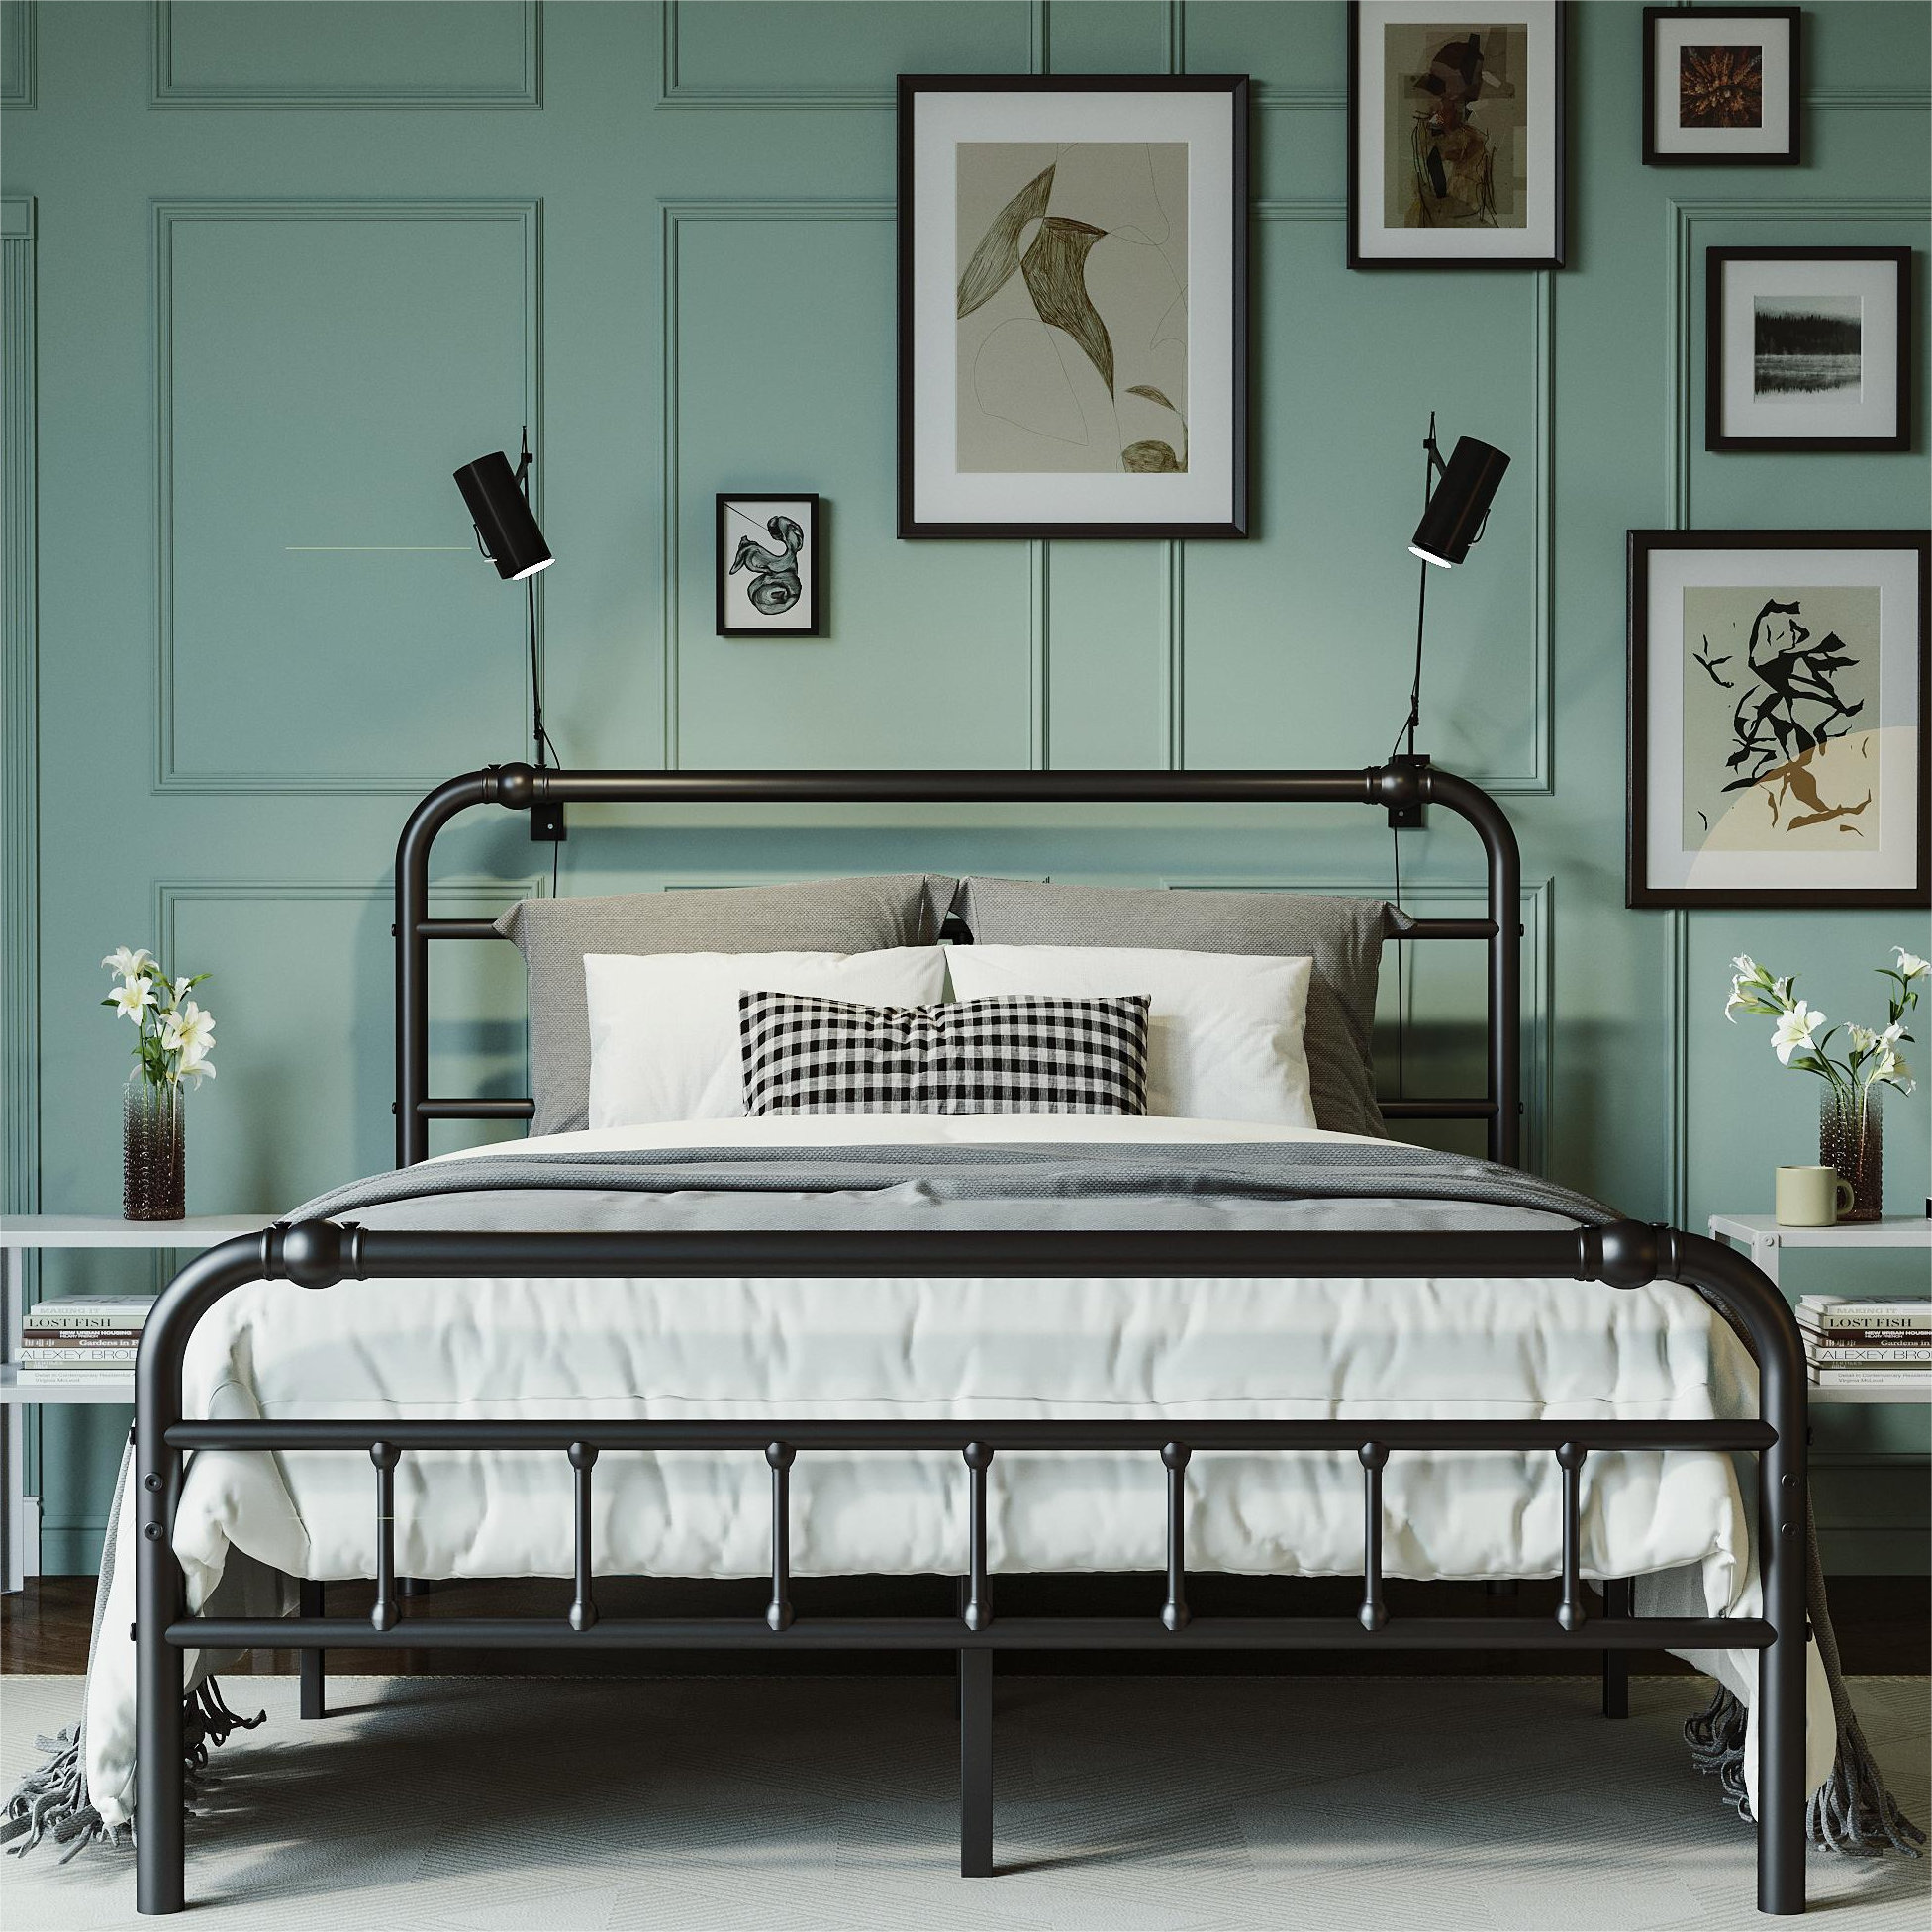 Exceptional High Quality Decorative Brass Bed Ends and Frame – Modern  Decorative